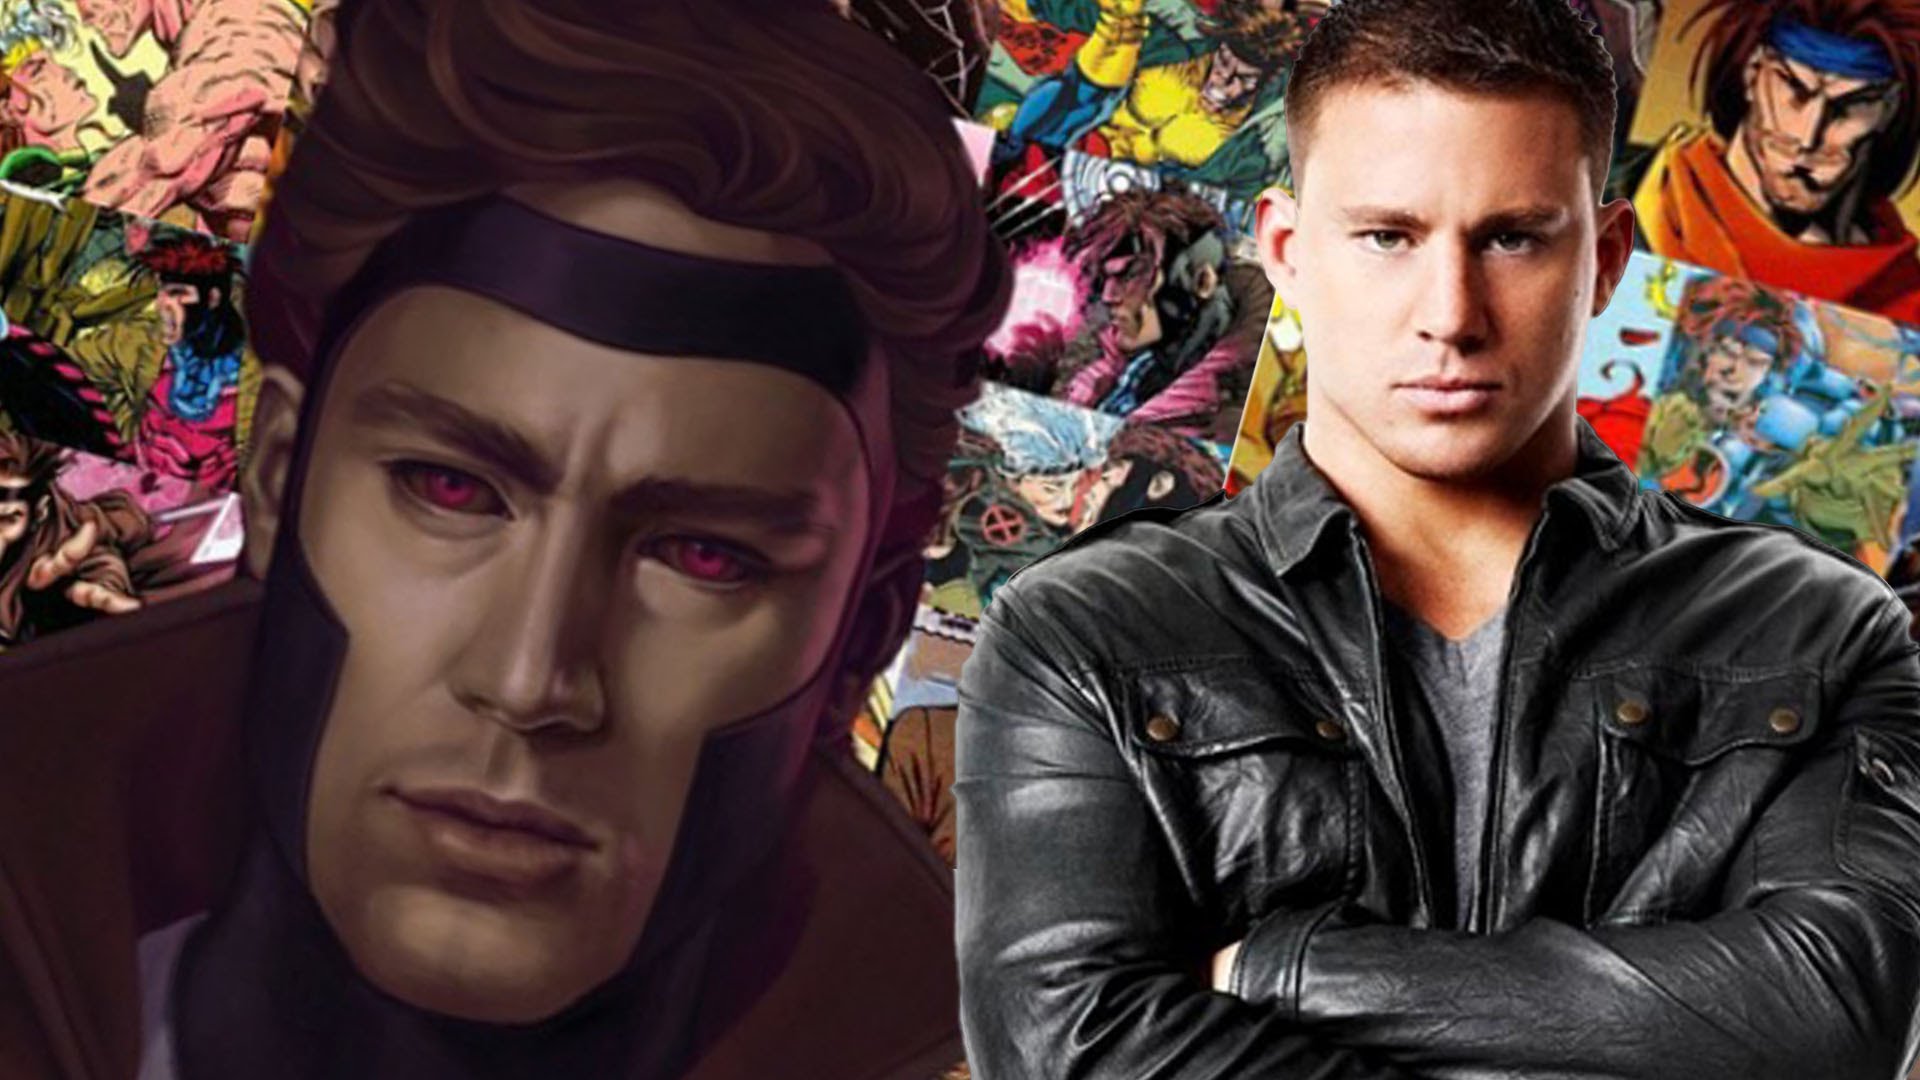 Channing Tatum's Gambit movie finally catching traction, because fox new rating system.